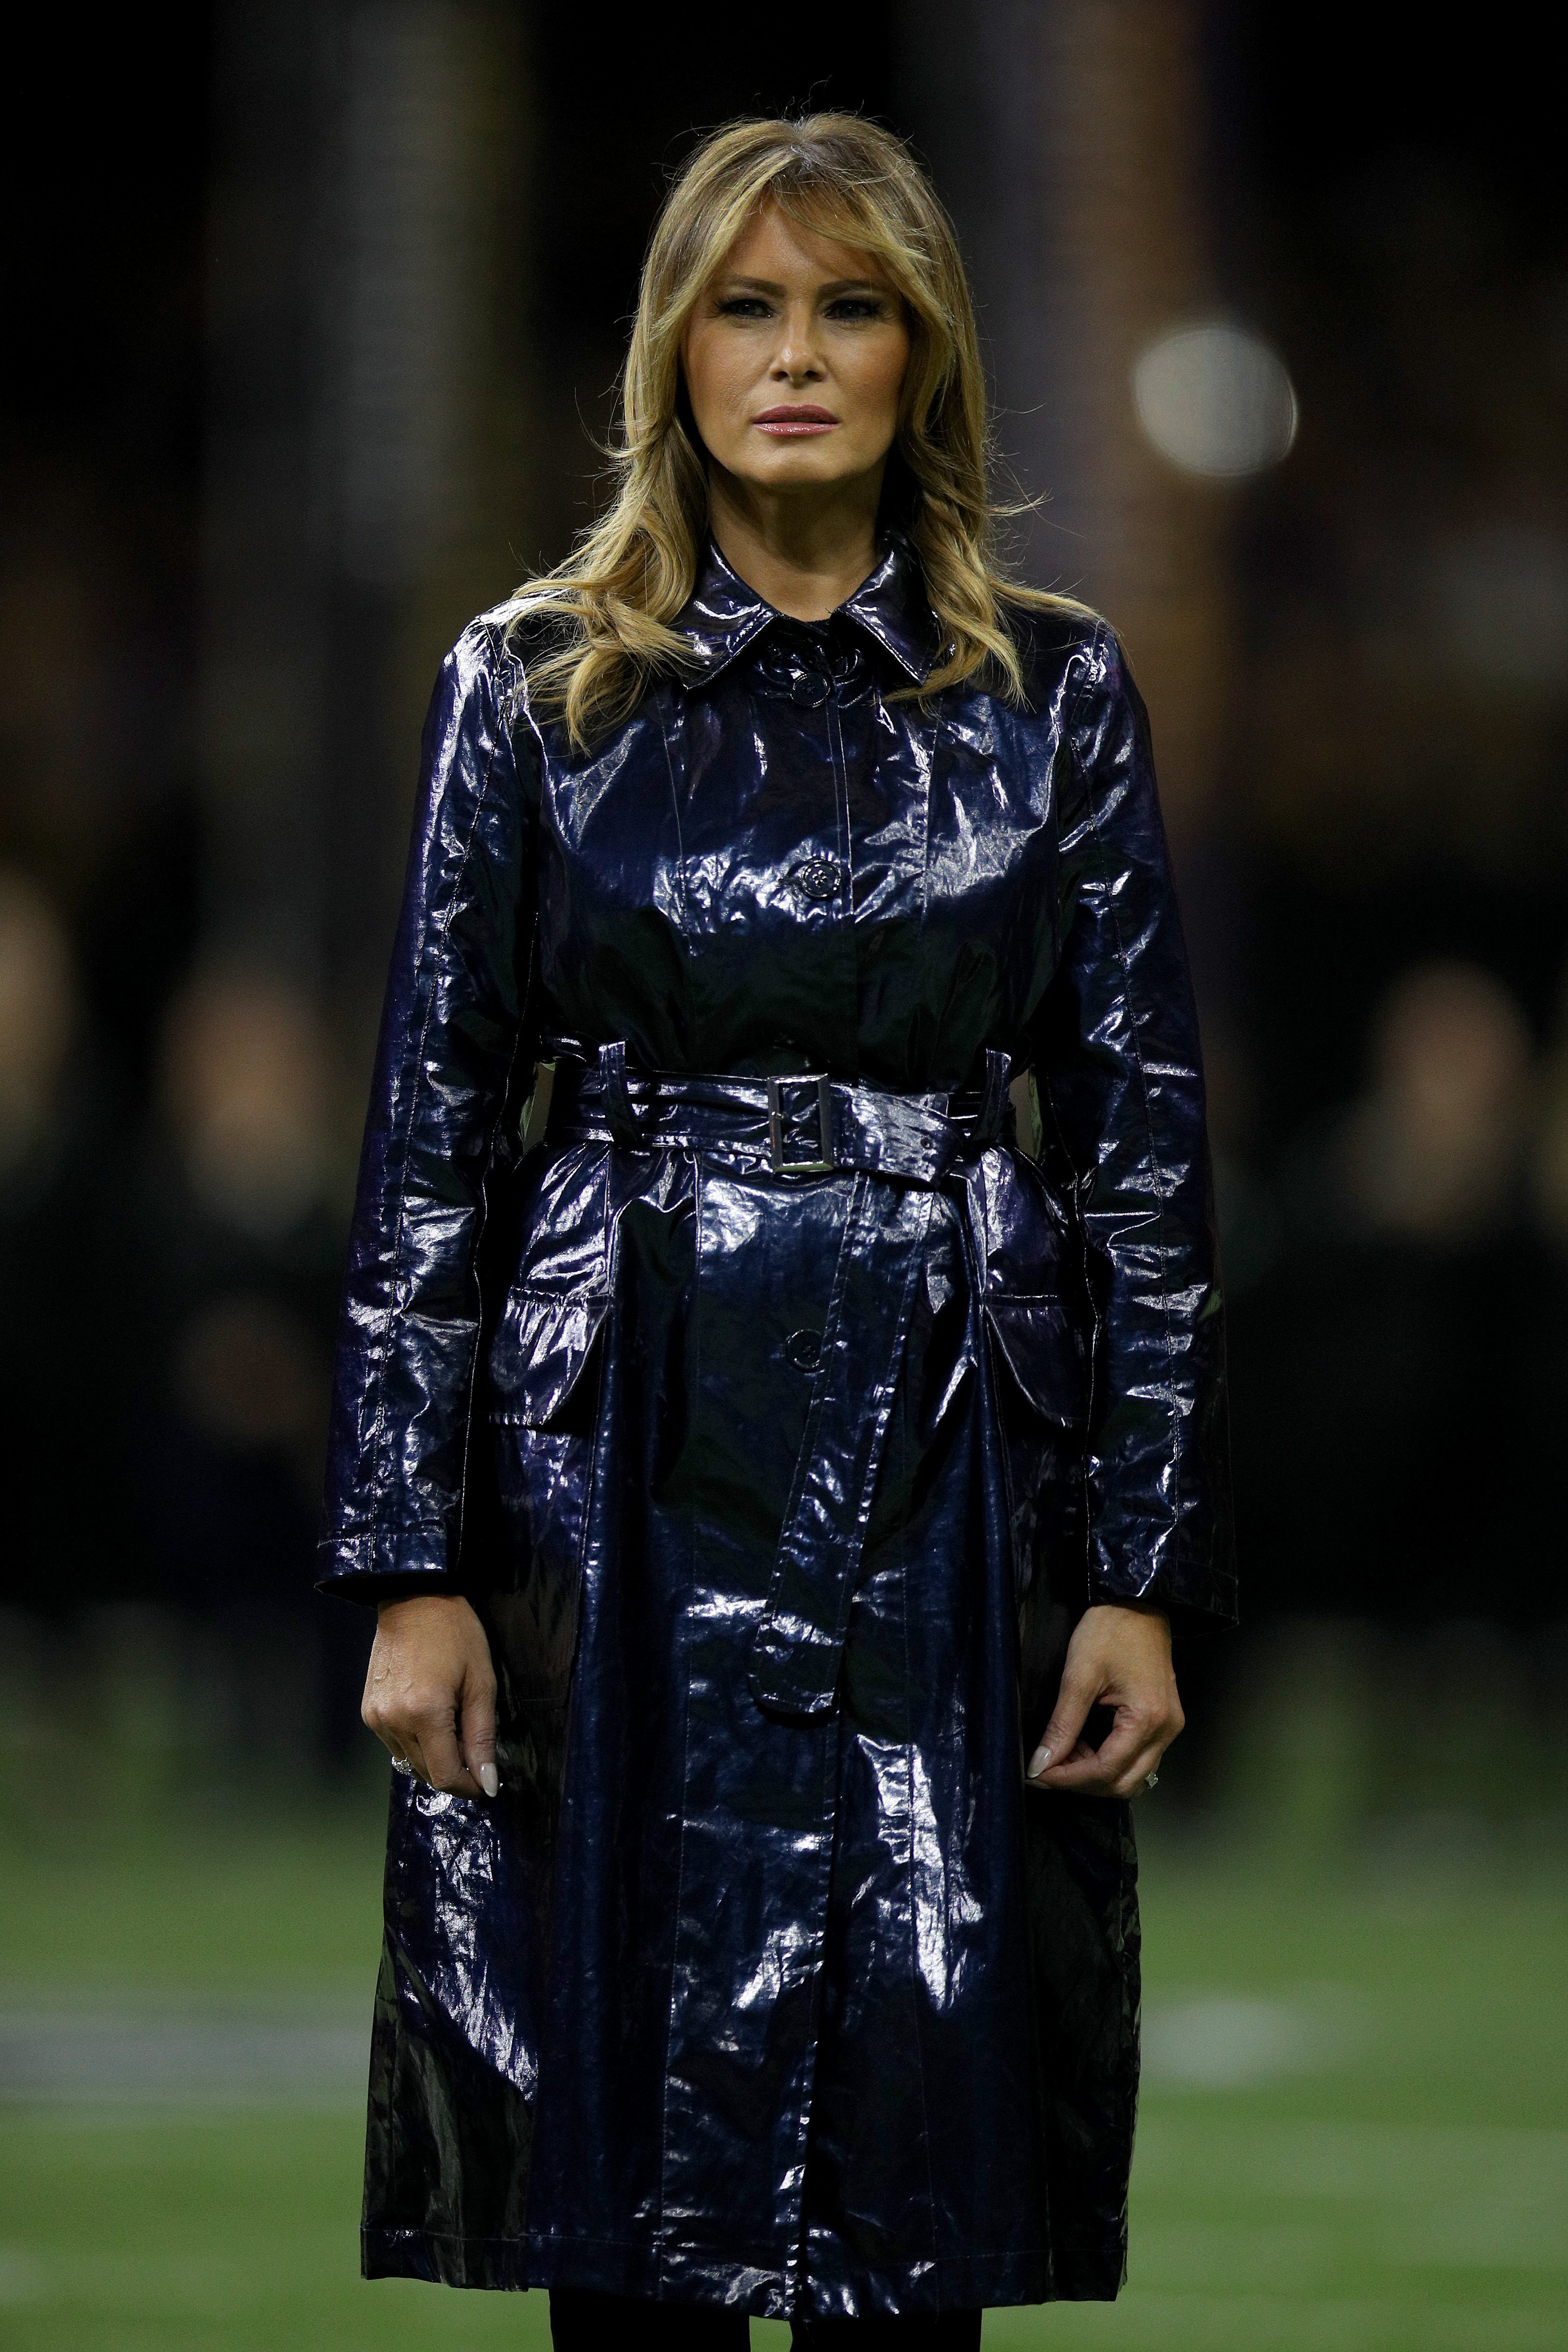 Lady Melania Trump attends the College Football Playoff National Championship game on January 13, 2020, in New Orleans, Louisiana. | Source: Getty Images.